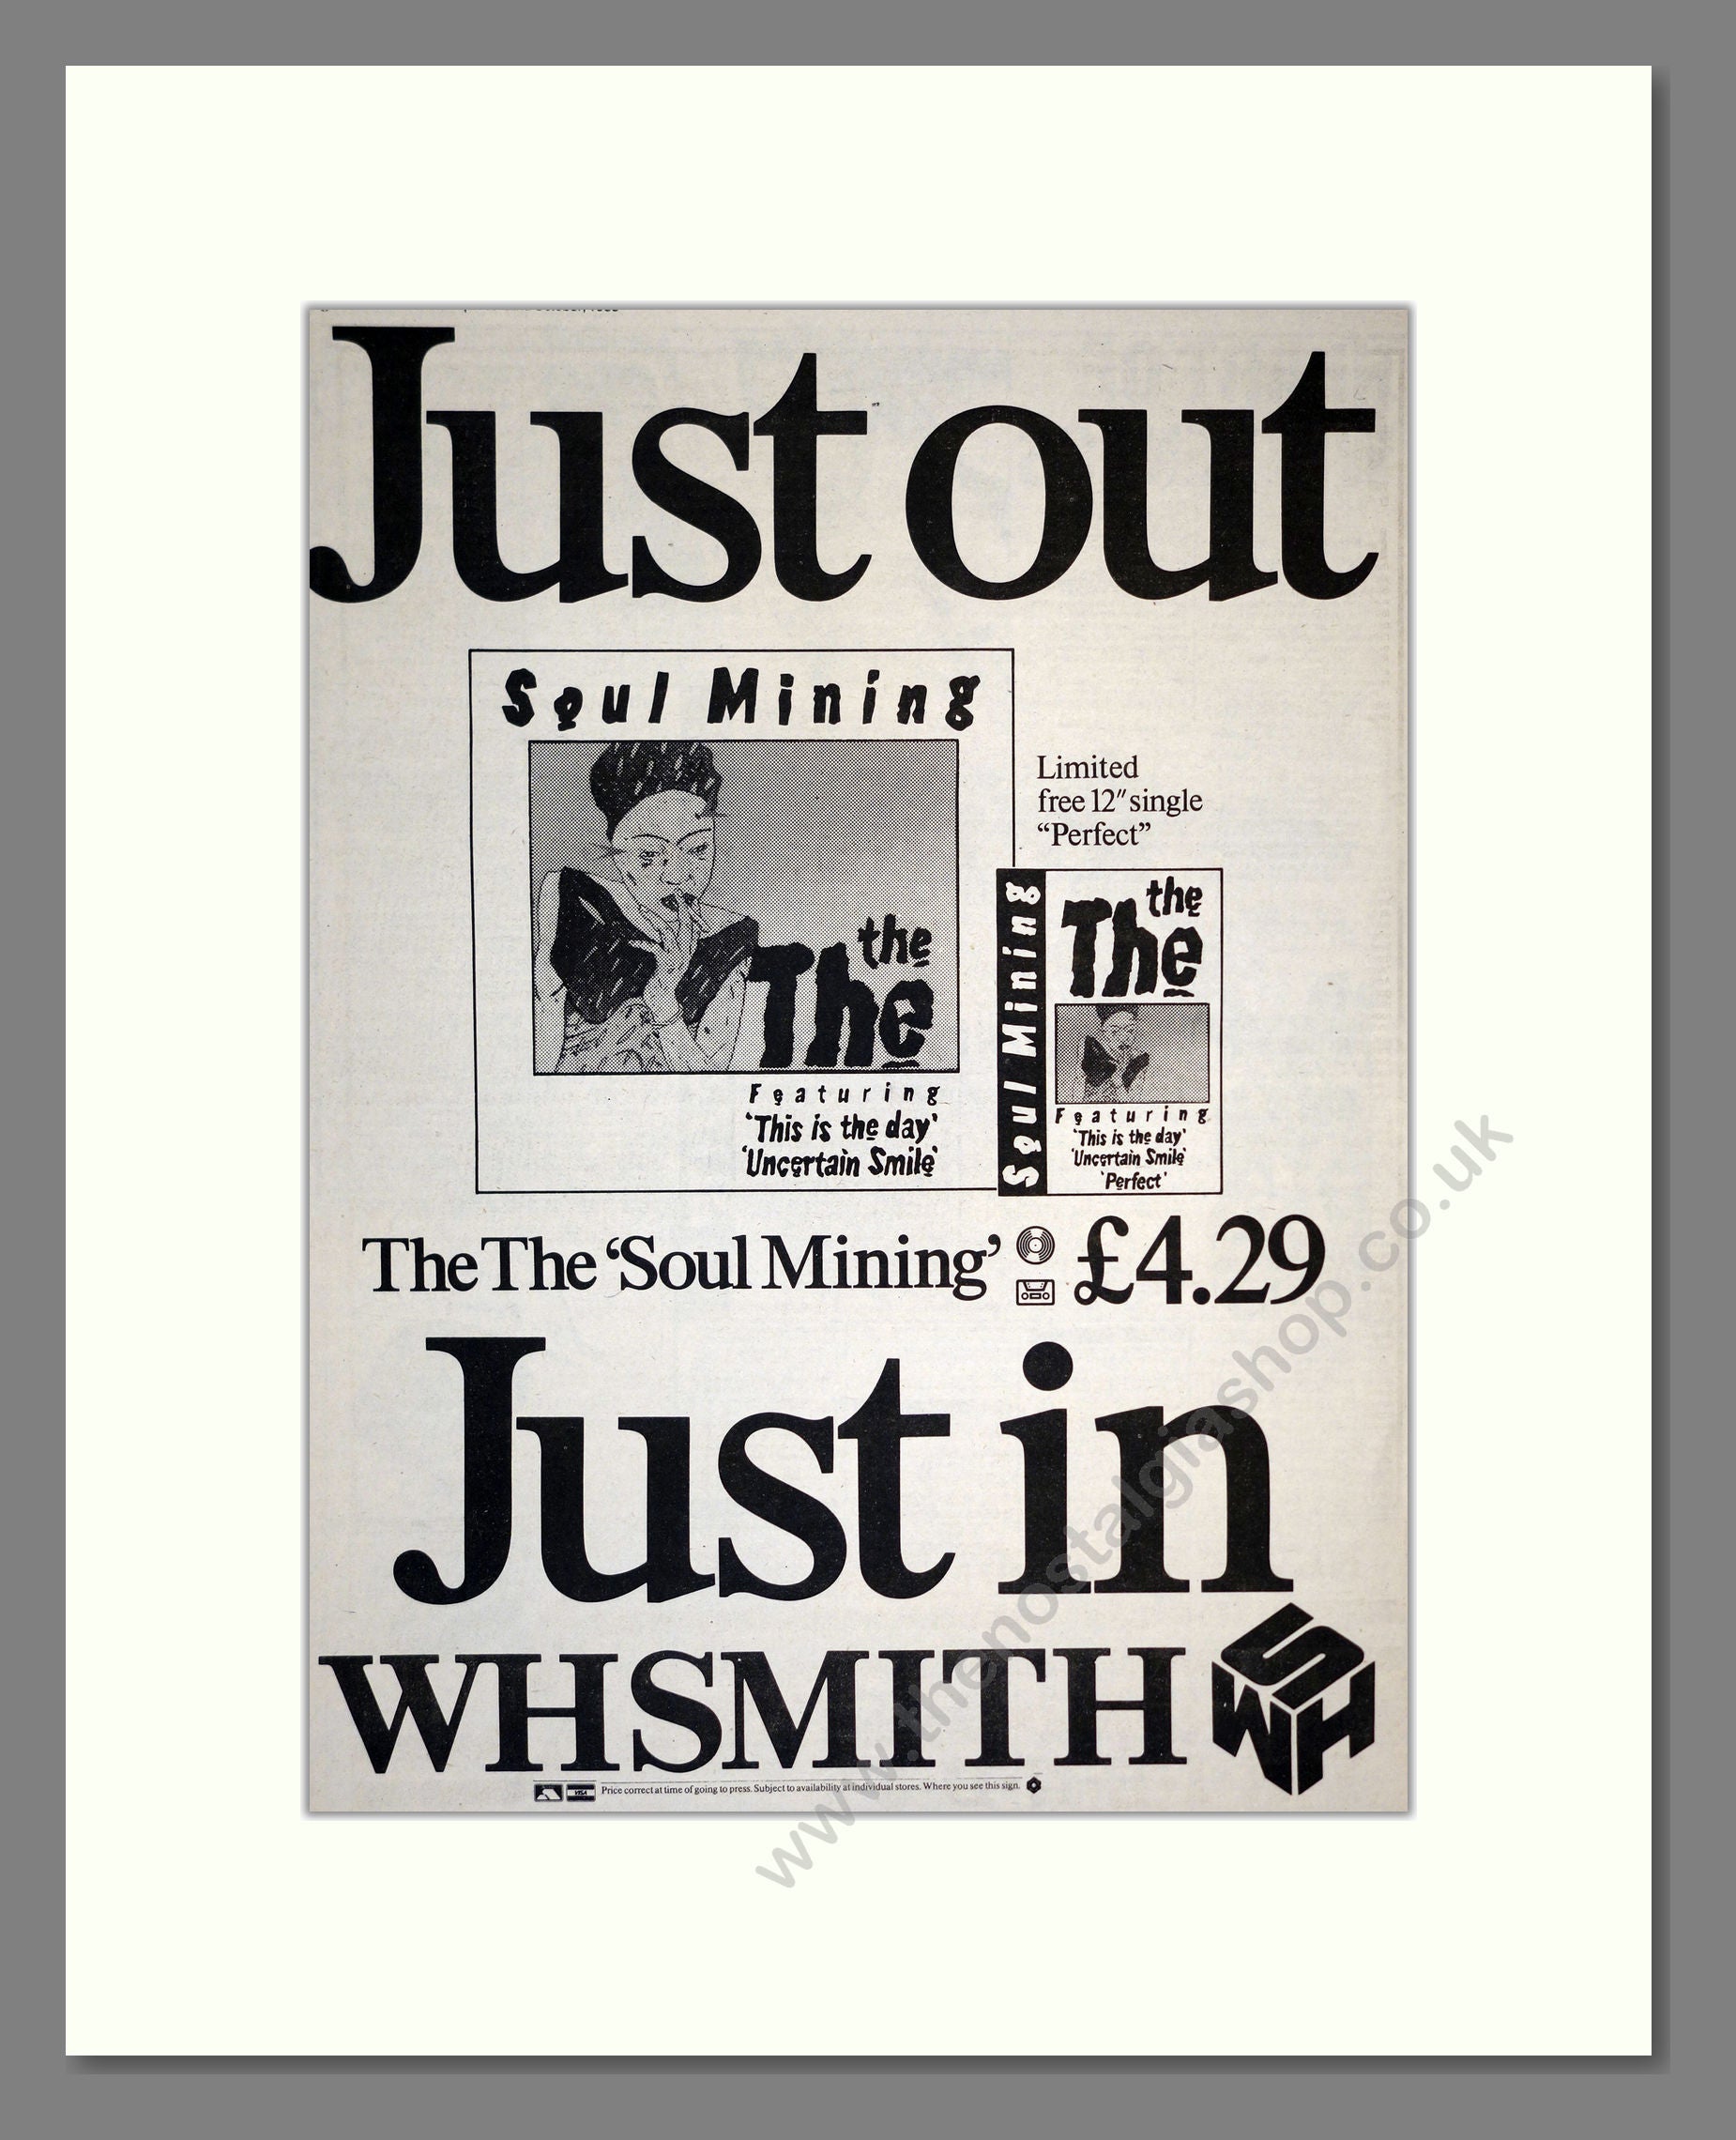 The The - Soul Mining. Vintage Advert 1983 (ref AD17431)